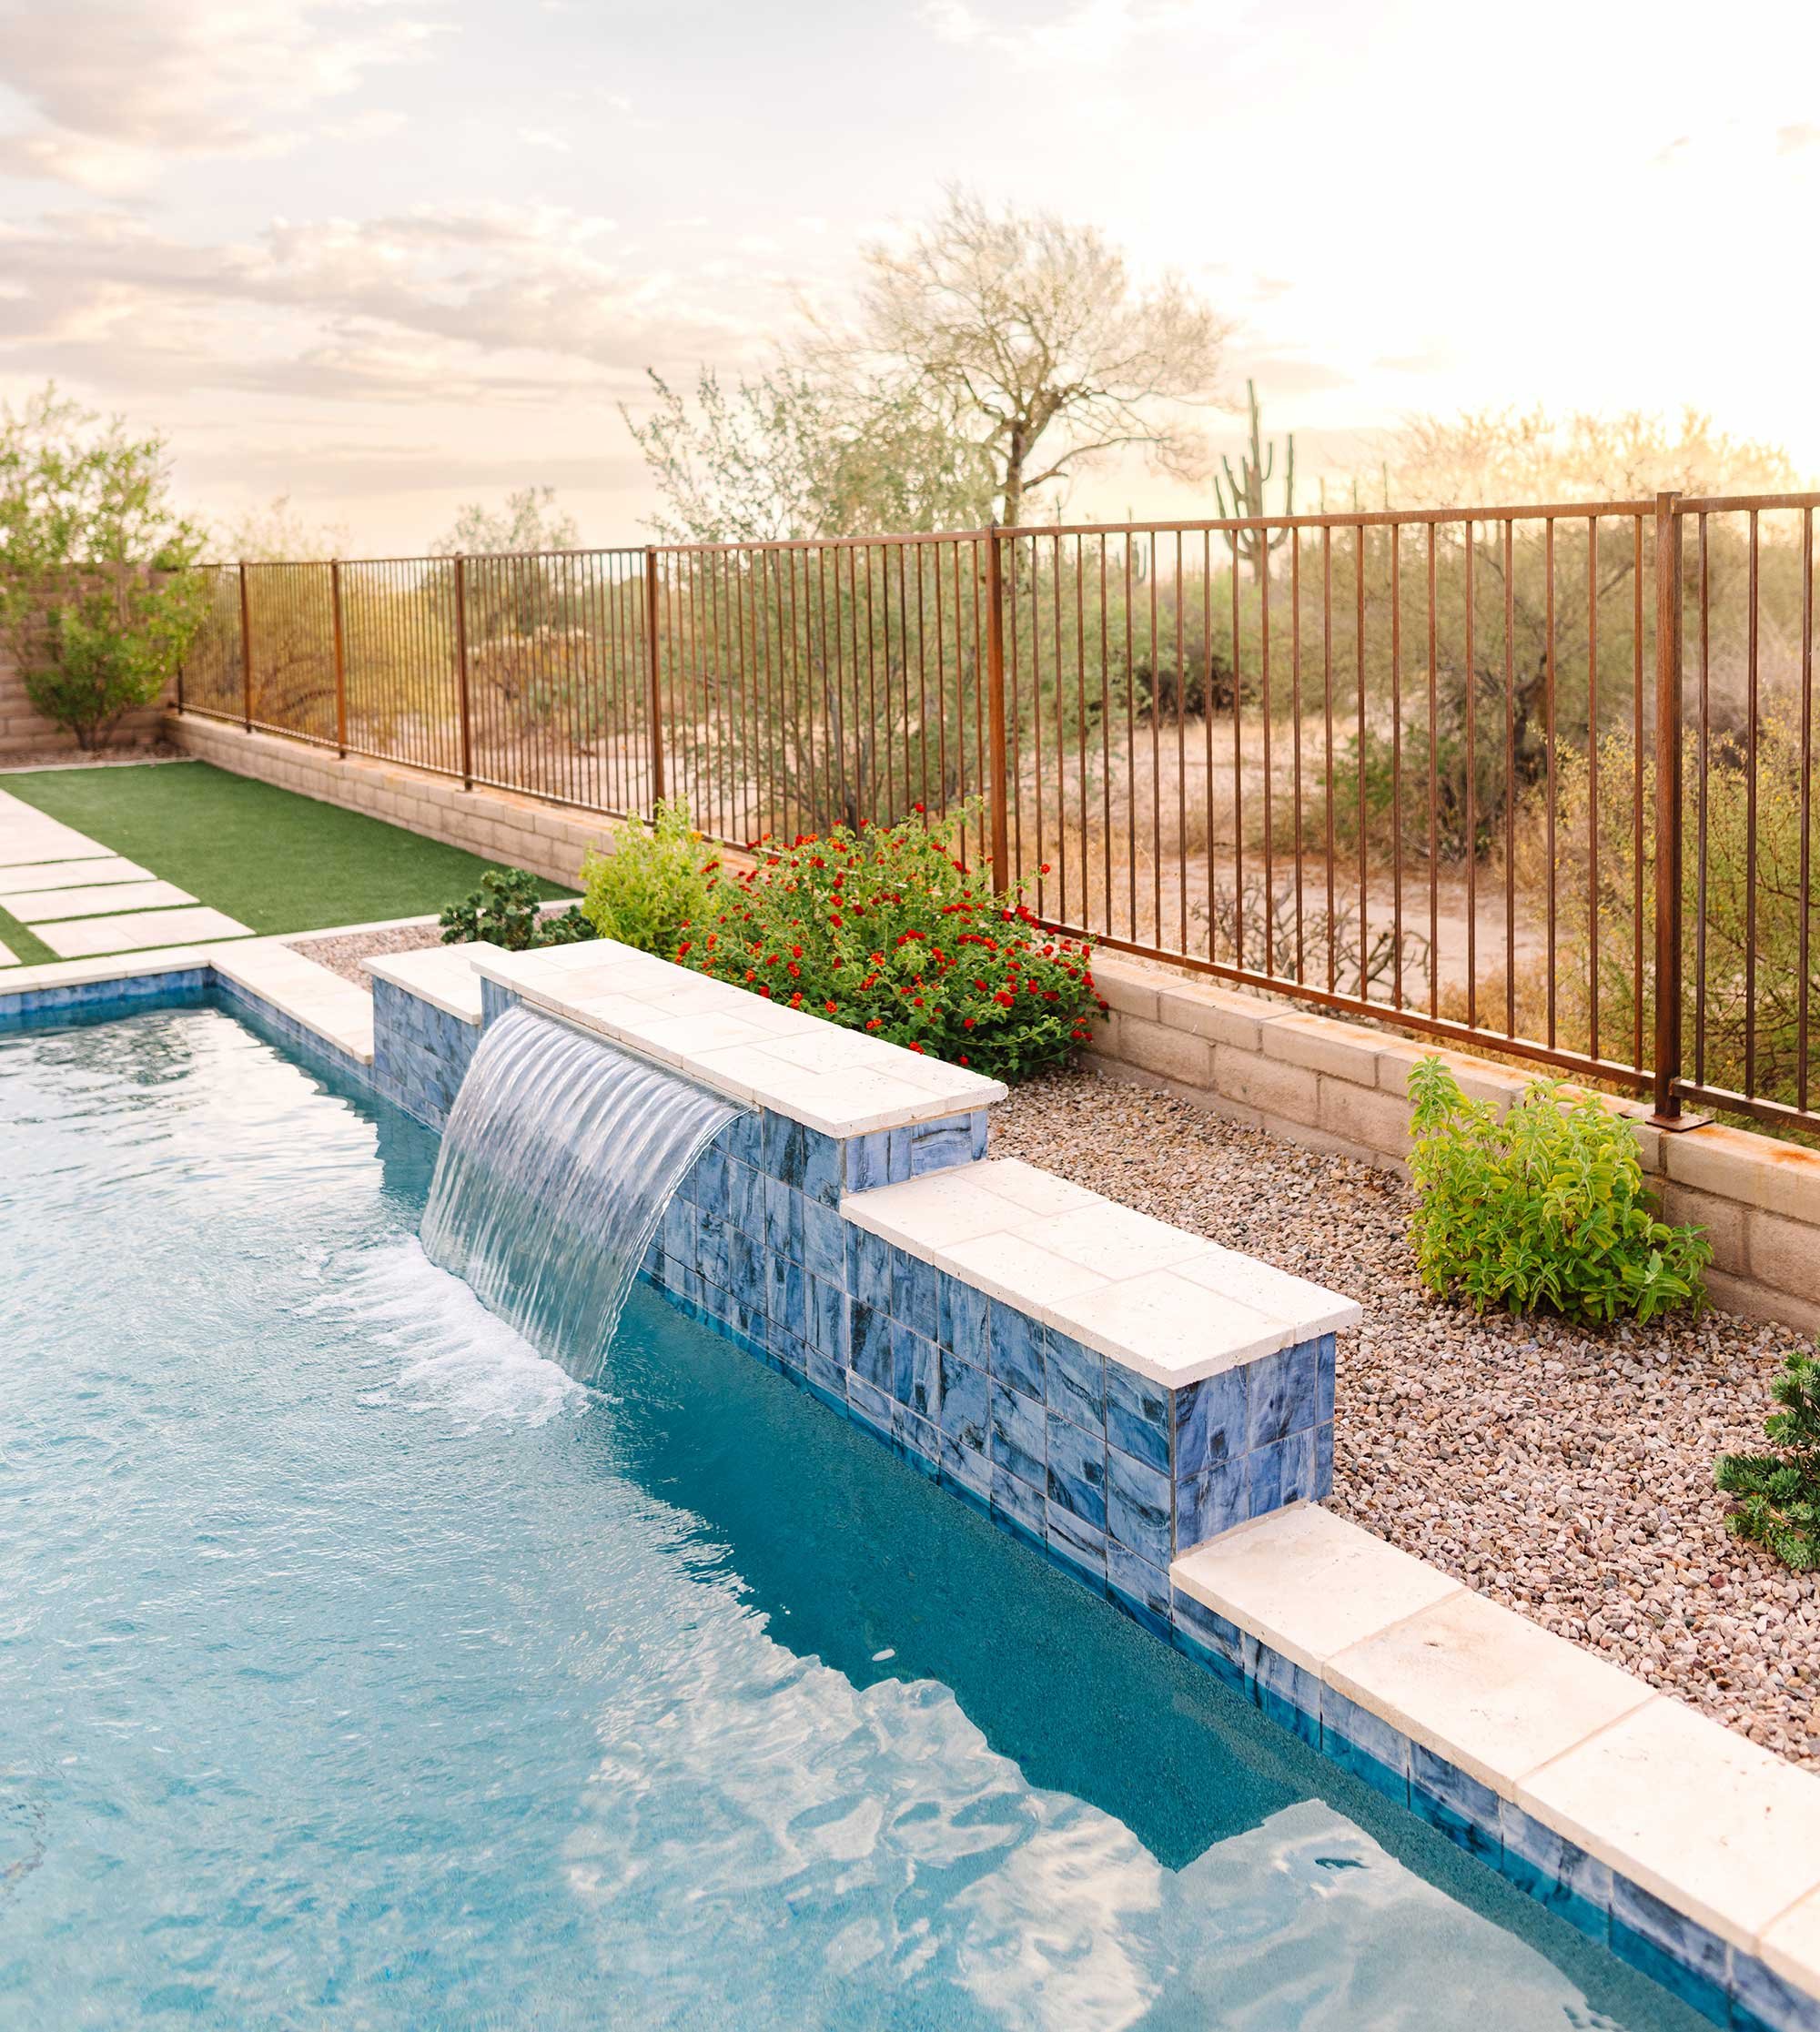 A tiled wall fountain adds the soothing sound of falling water to the yard, while the minimal corten fence provides a panoramic view of the desert landscape.